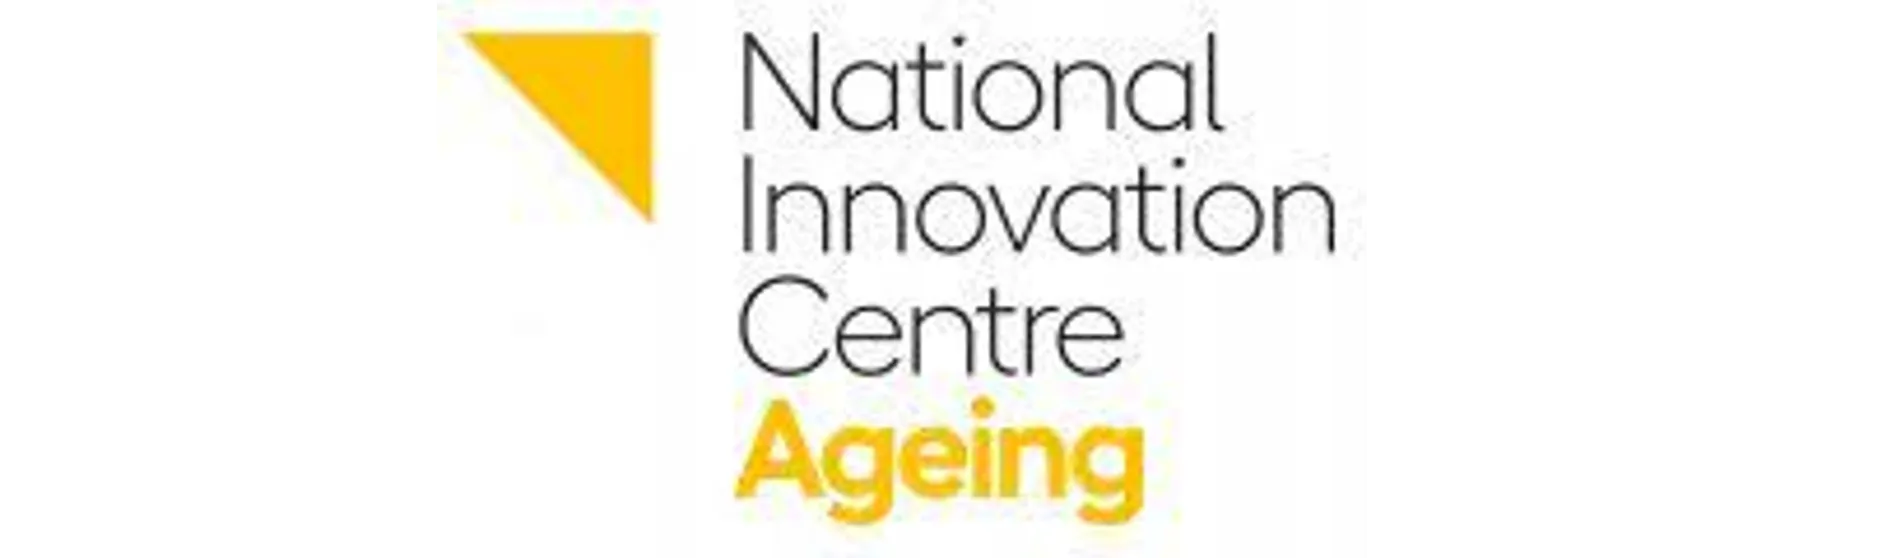 National Innovation Centre for Ageing